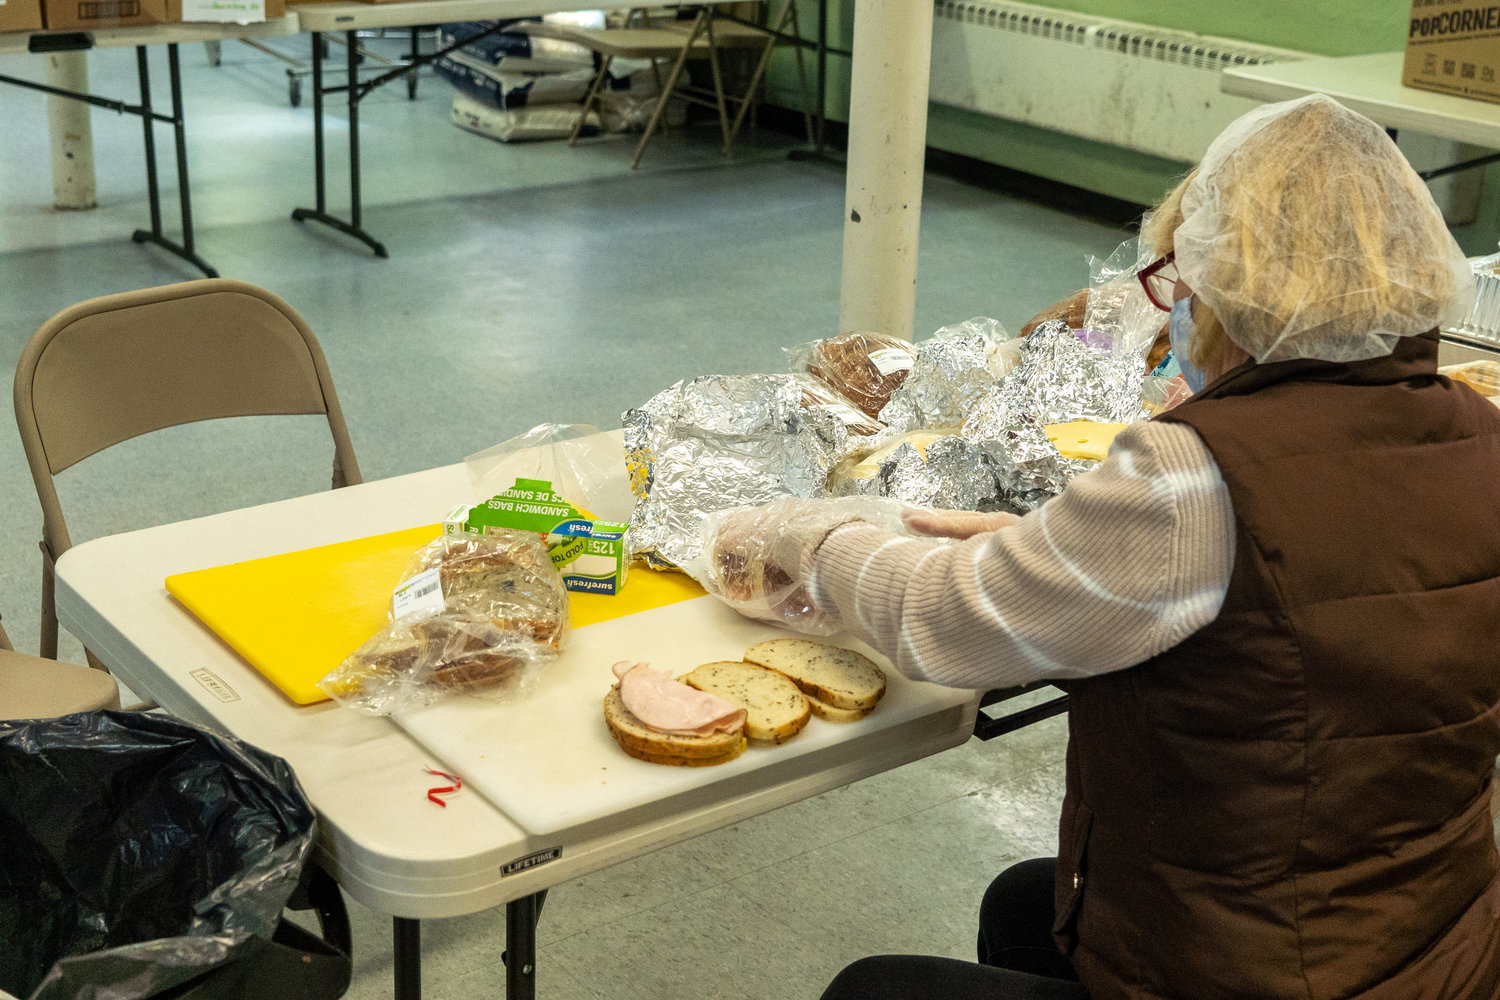 Soup to Nuts volunteers work to make sure no one leaves hungry, even when hot meals run out. Instead, they step up to the plate and prepare sandwiches for their guests.